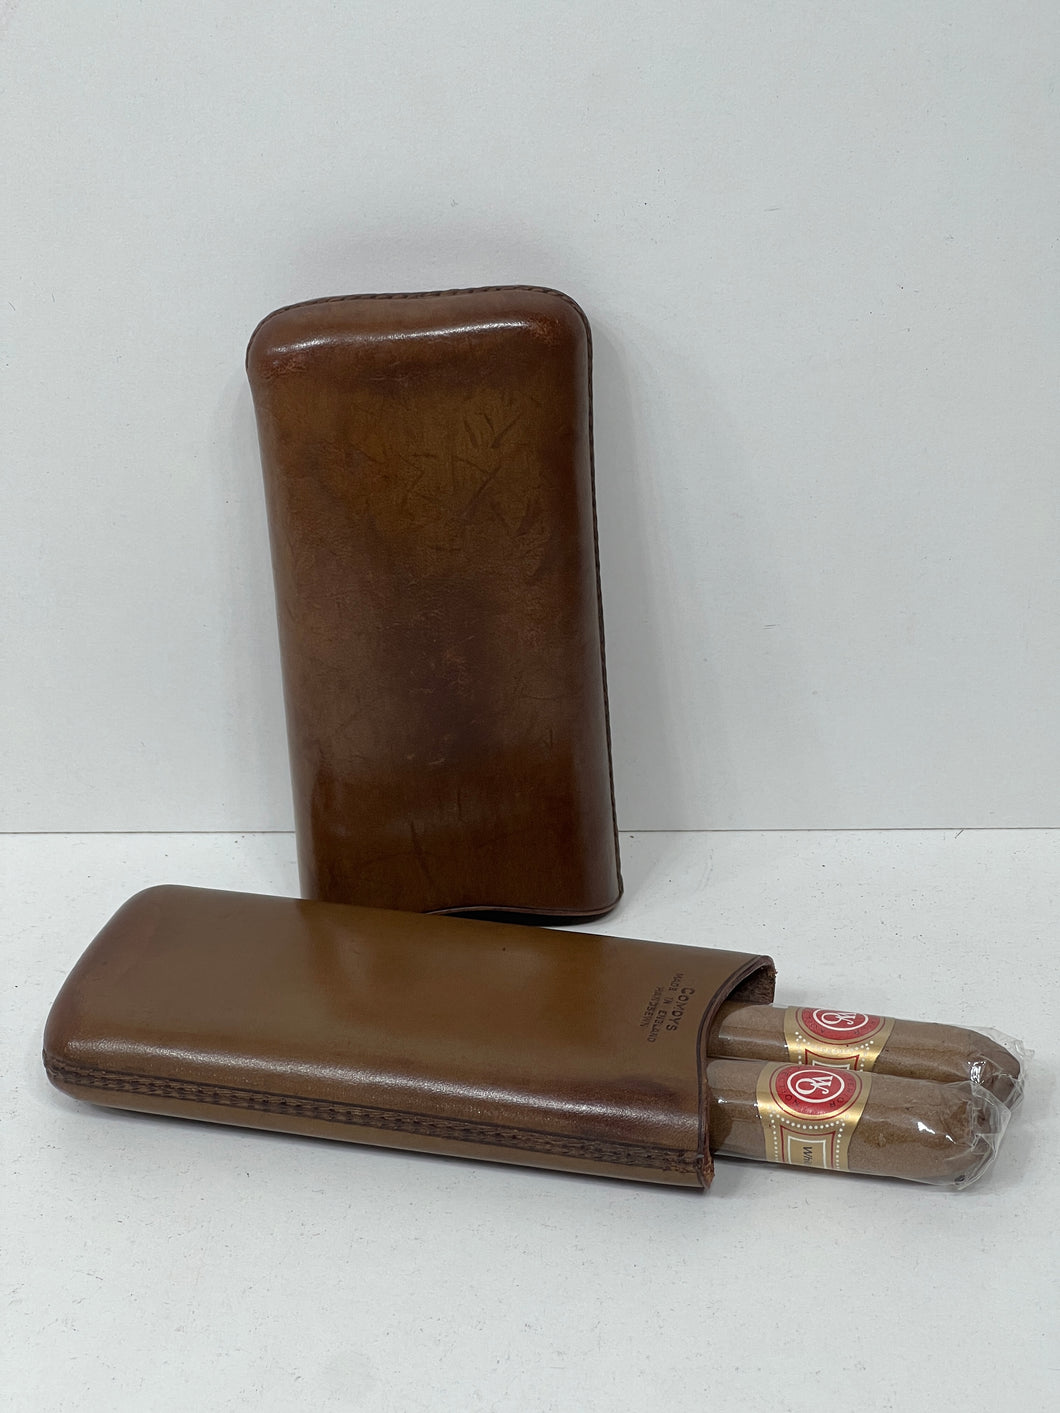 Spectacular vintage leather cigar case excellent stitching by Comoys